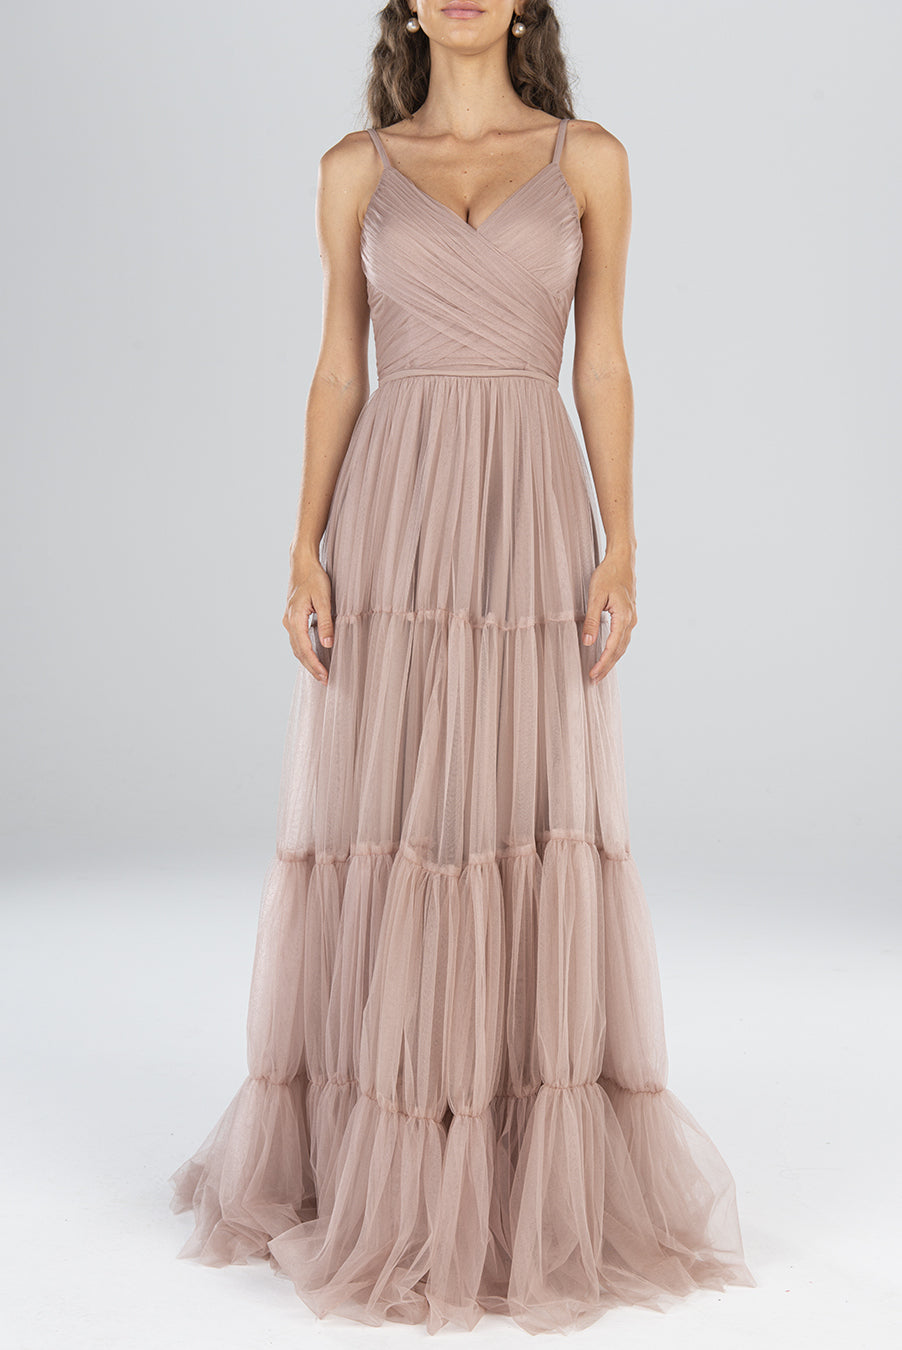 Cidal - Mystic Evenings | Evening and Prom Dresses